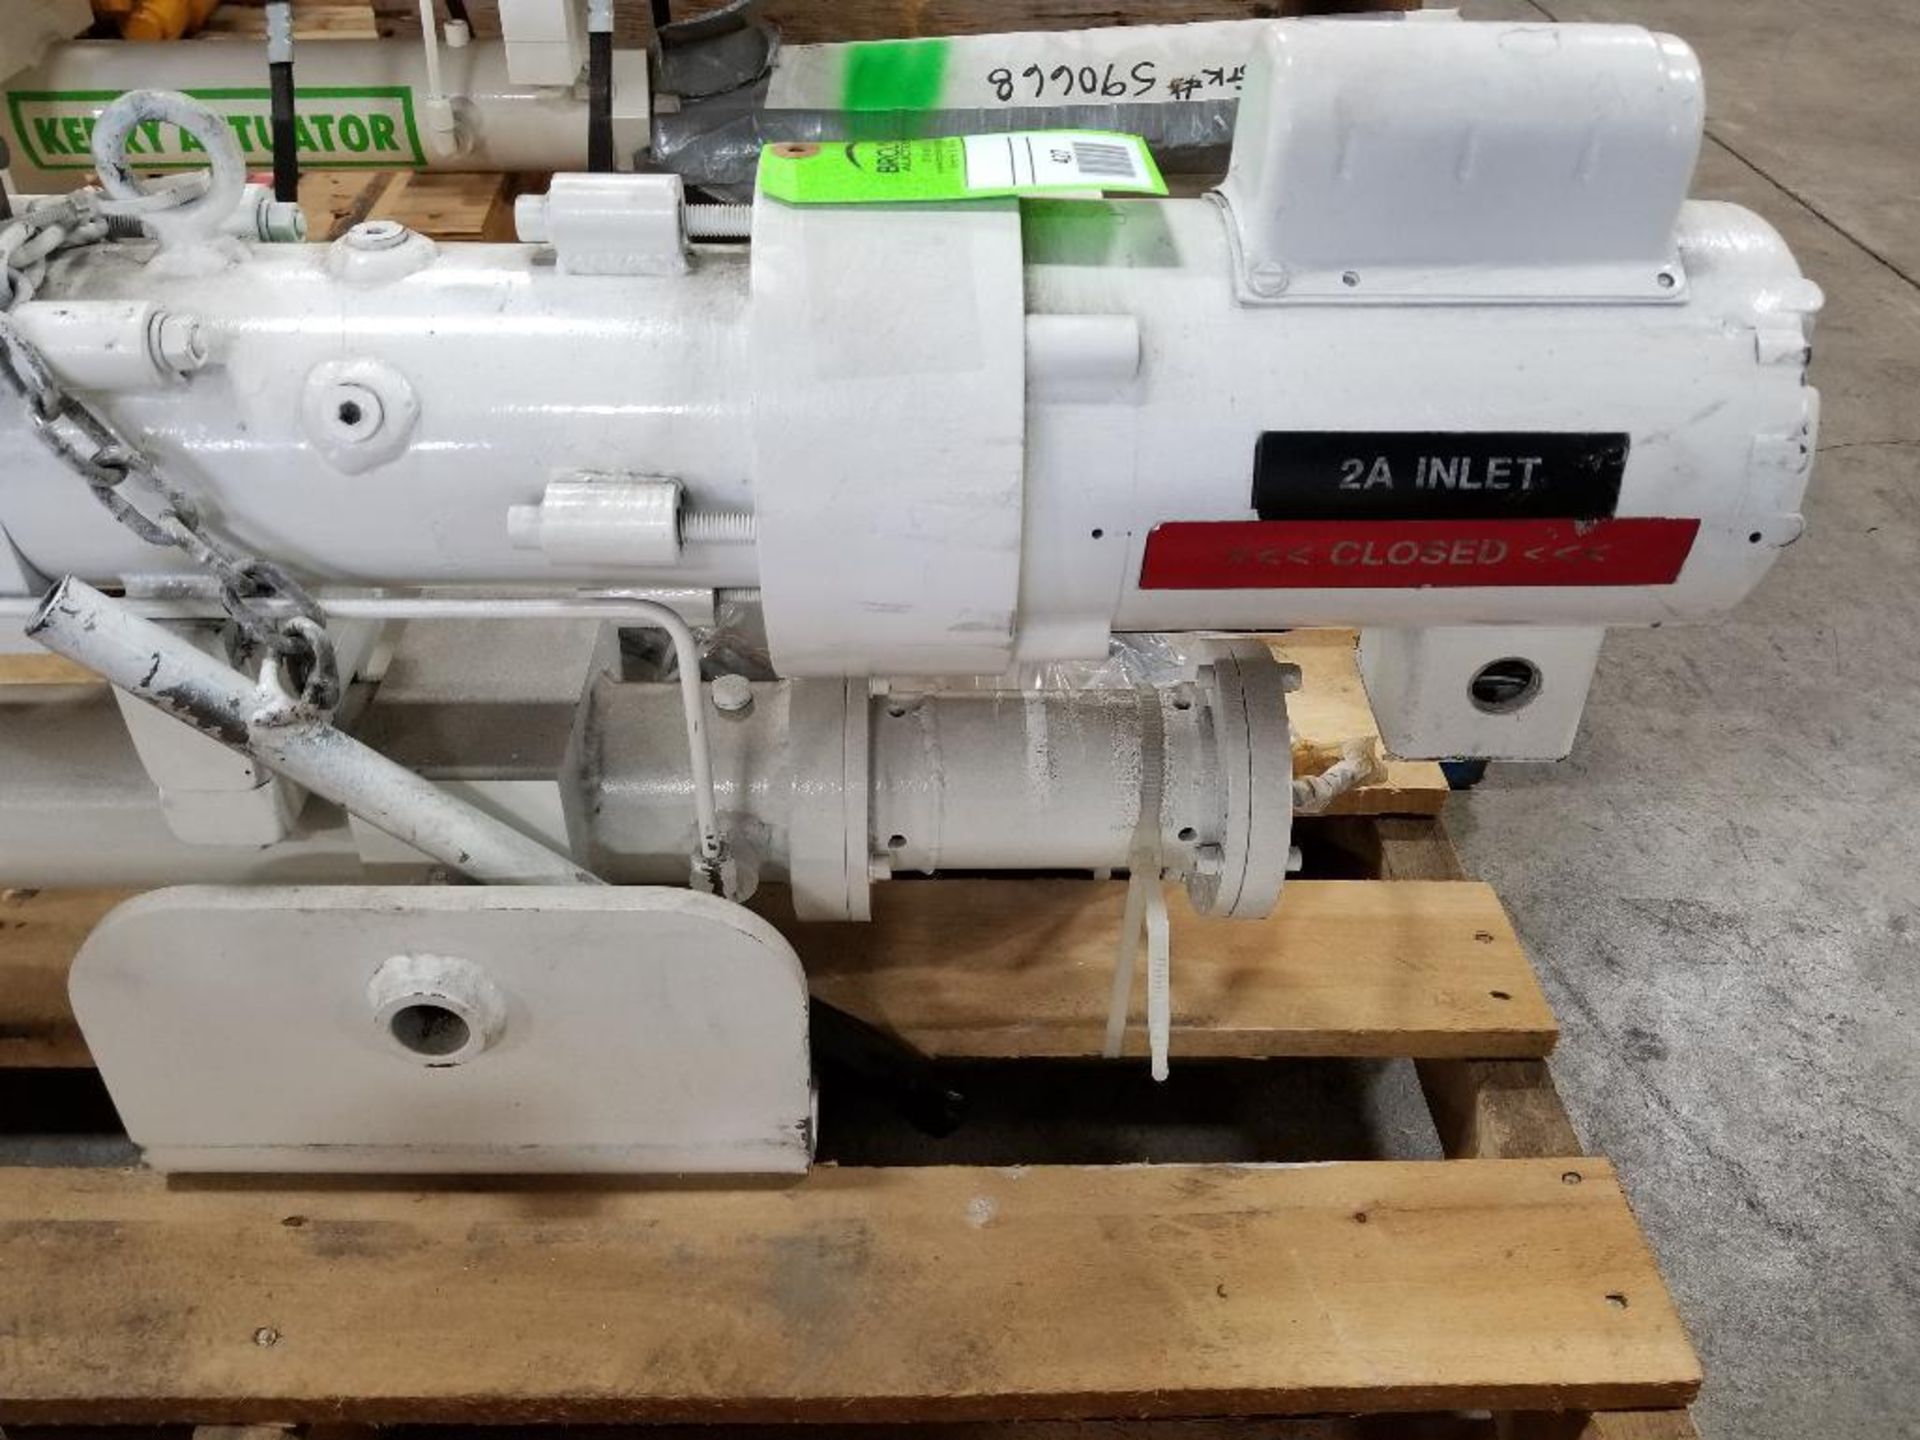 Kerry Actuators B-series 12516.1-6-2. 24". Appears new. - Image 2 of 5